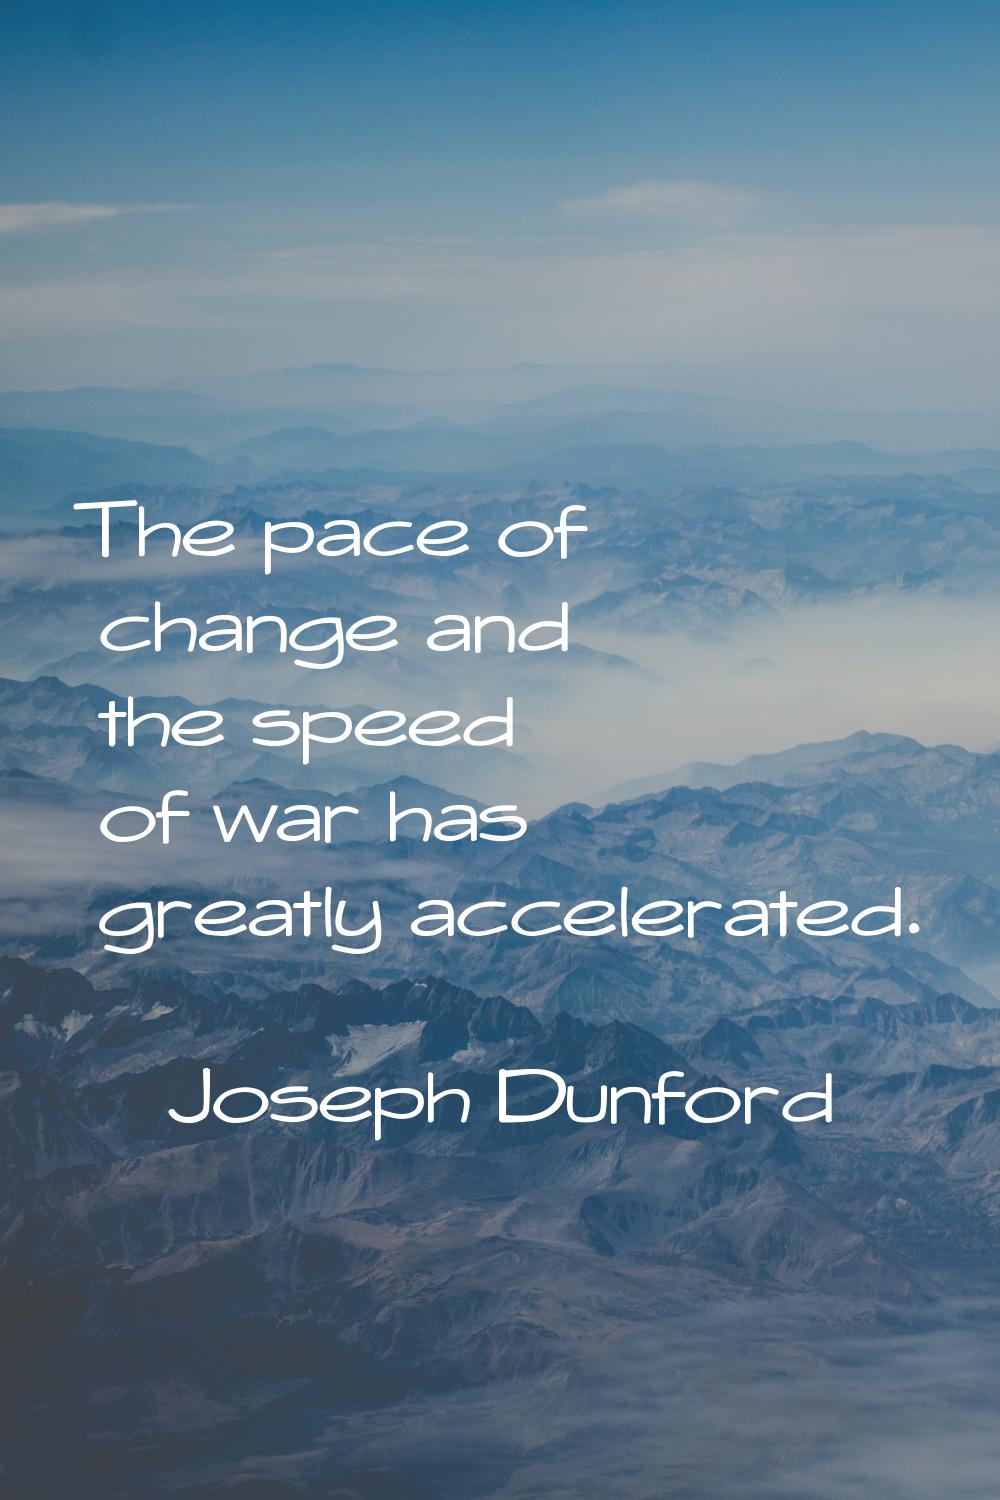 The pace of change and the speed of war has greatly accelerated.